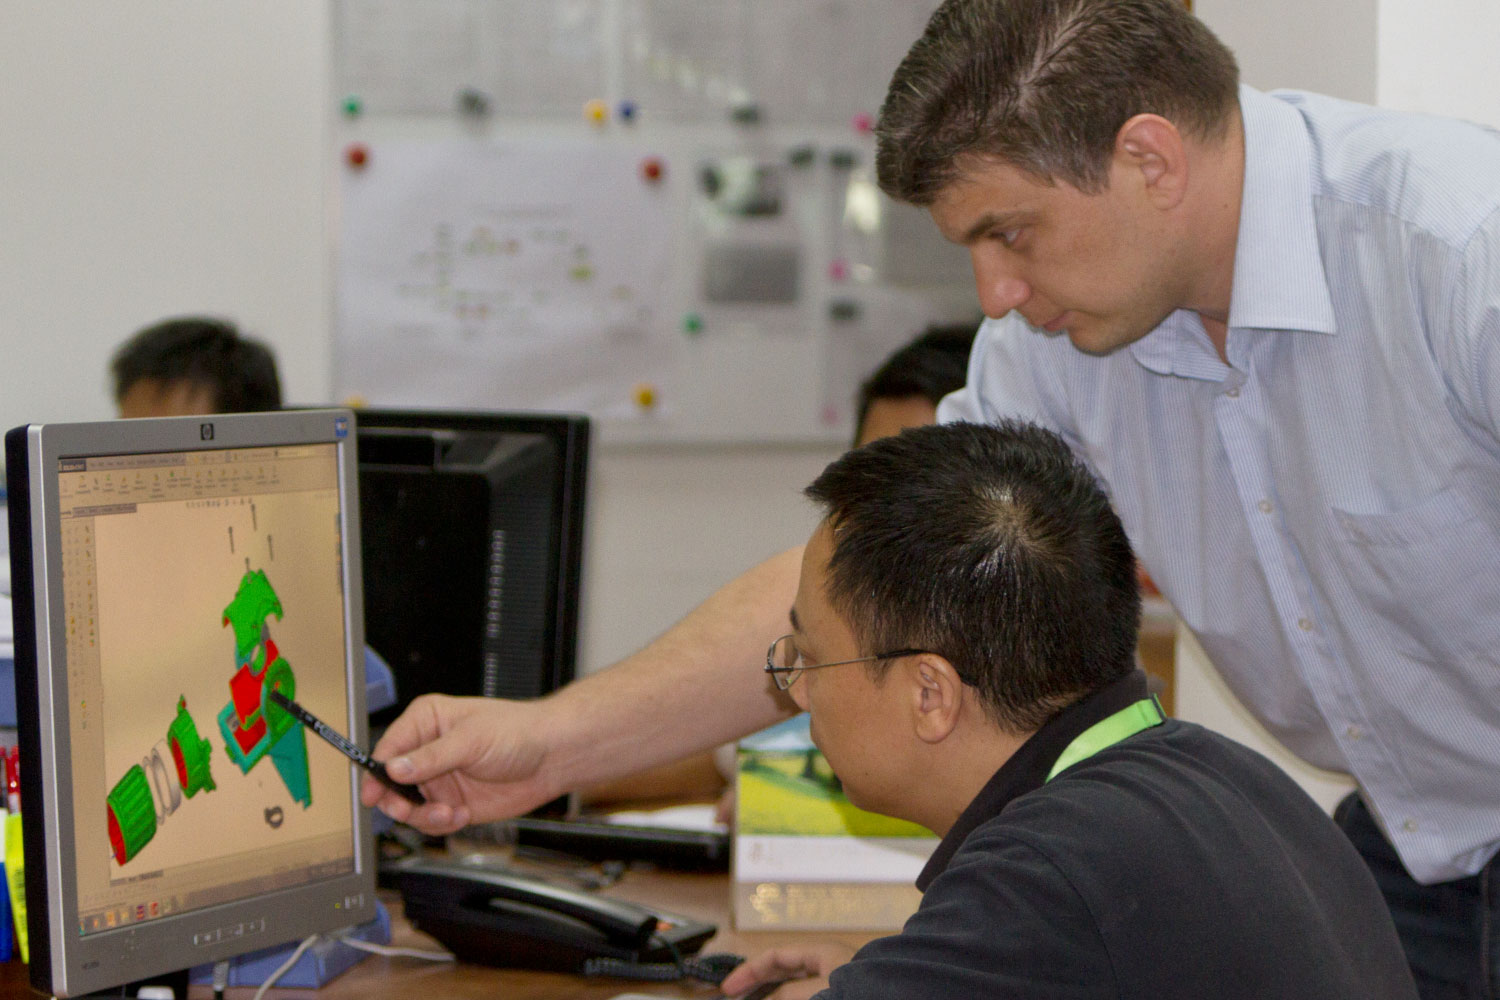 Research and development department in Tetro, China, 2 men near a computer looking at a 3D part